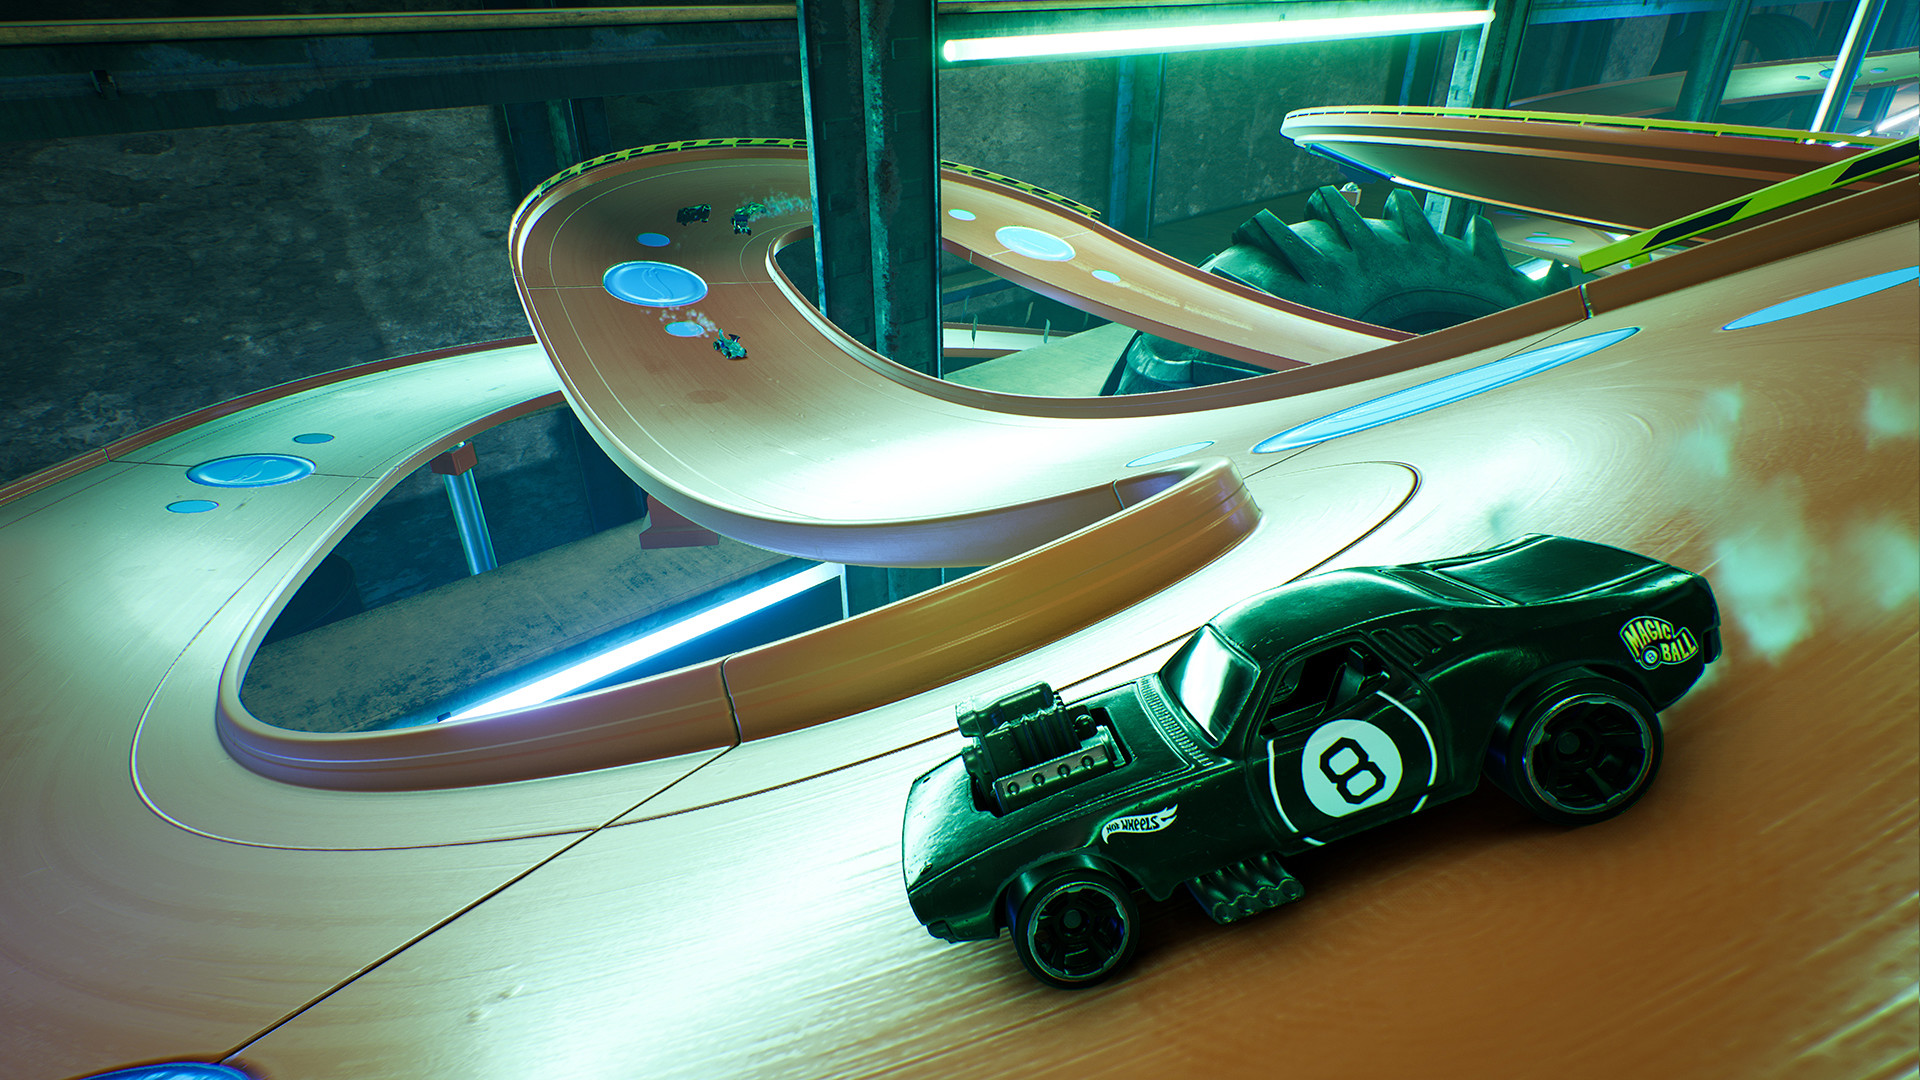 Hot Wheels Unleashed XBOX One Account